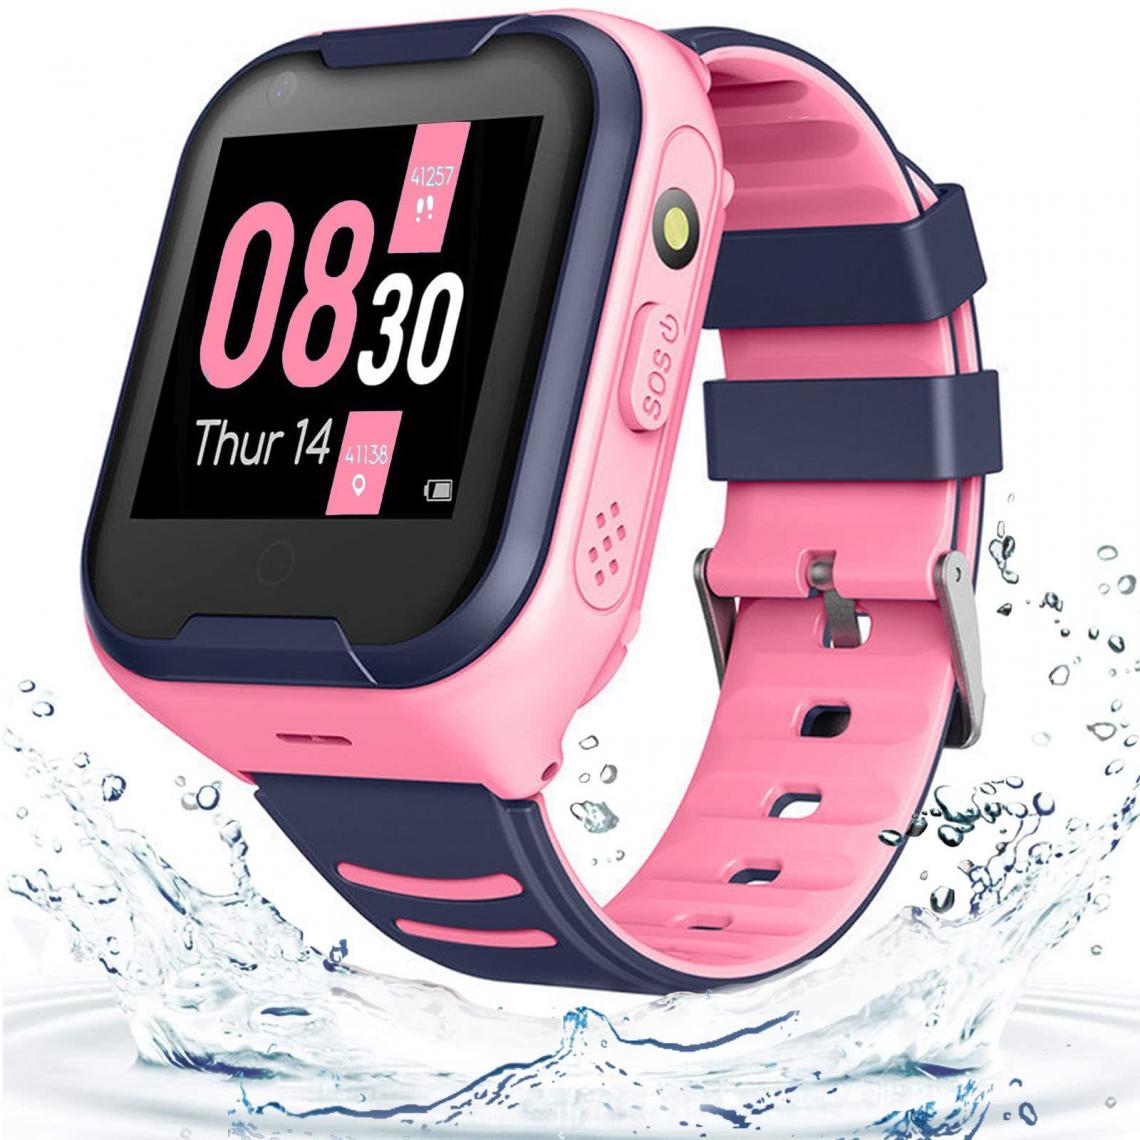 Chronotech Montres - Chronus 4G GPS Smart Watch,Waterproof Phone Smartwatch with GPS Tracker Touch Screen Video Phone Call Real-time Tracking Camera SOS Alarm Pedometer for Birthday Gift(Pink) - Montre connectée